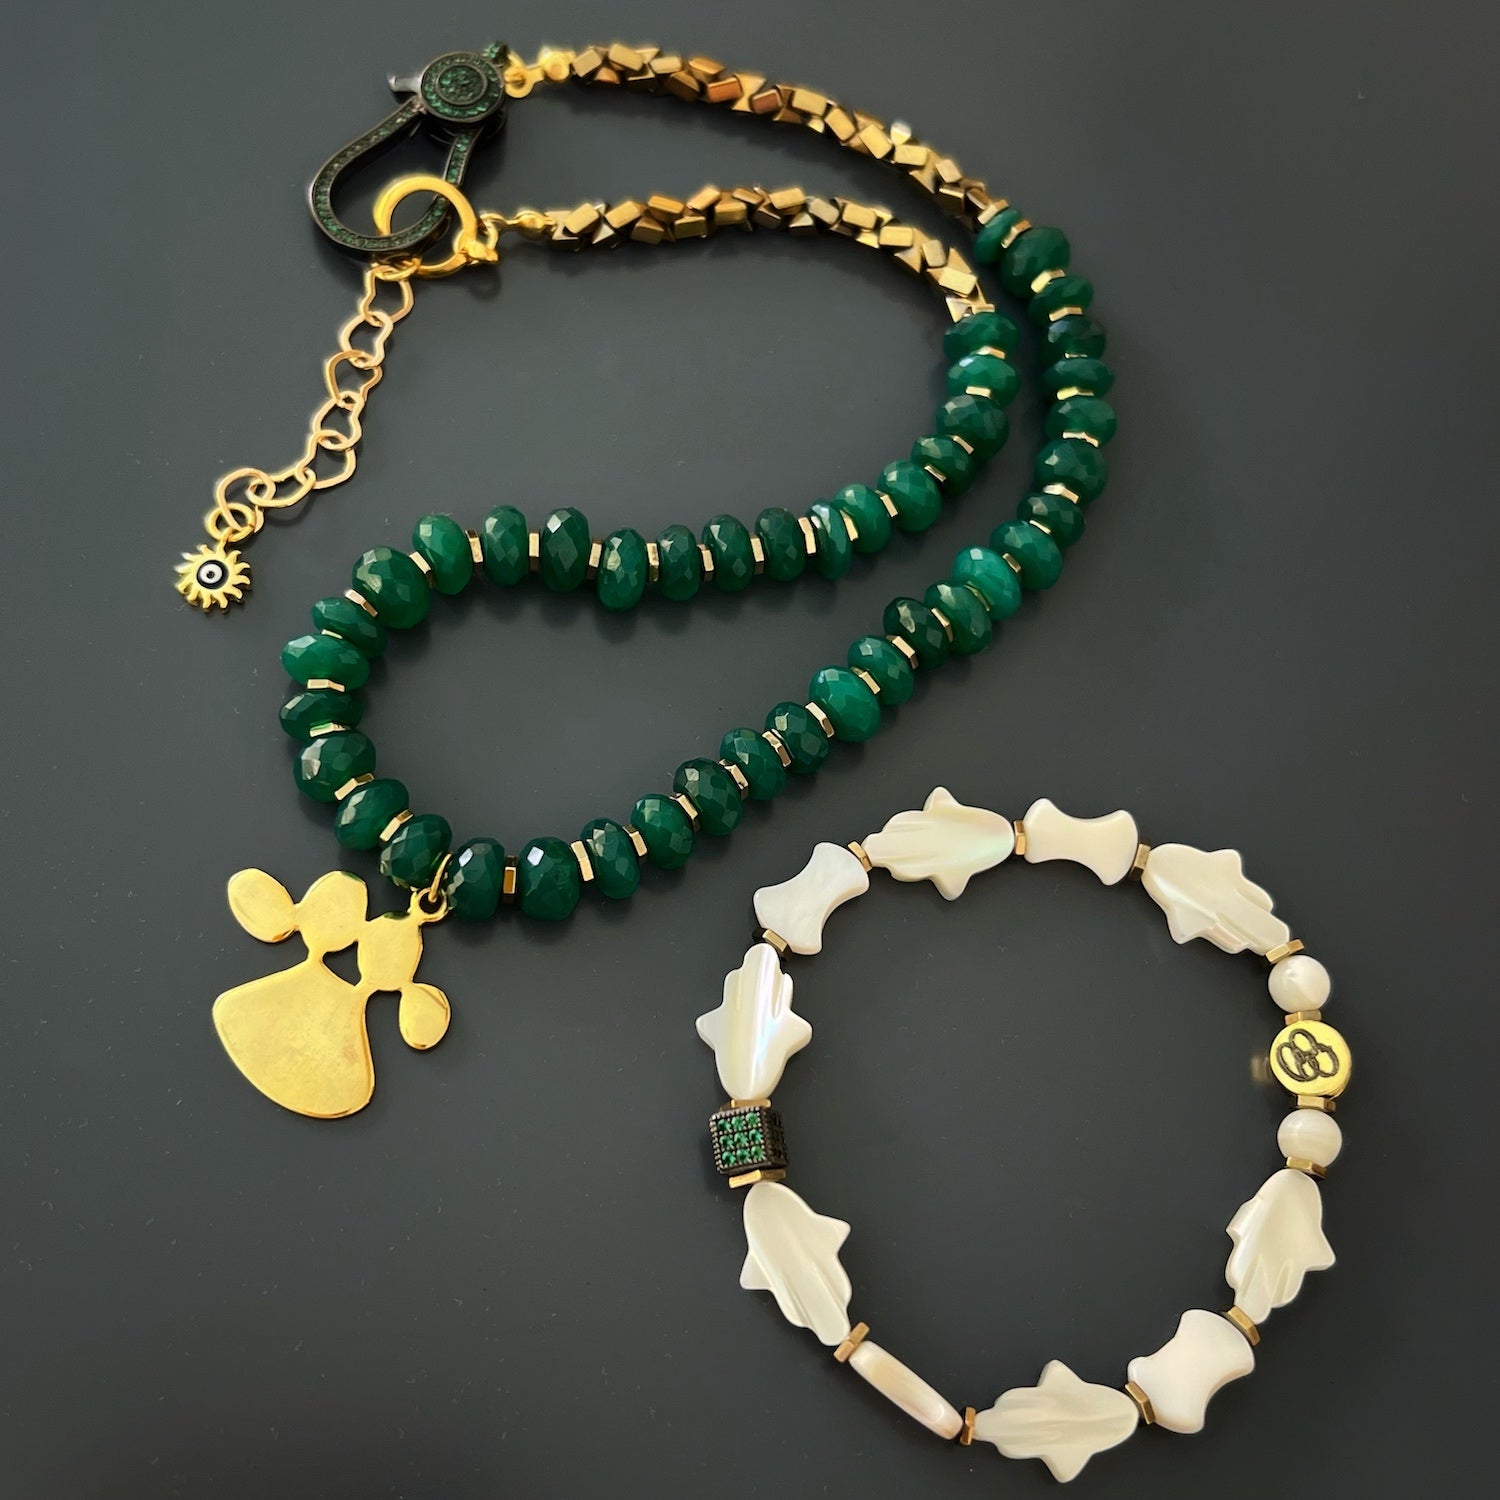 The Mother and Daughter Jade Necklace, embodying the precious bond between a mother and her daughter, symbolized by the exquisite pendant and jade beads.